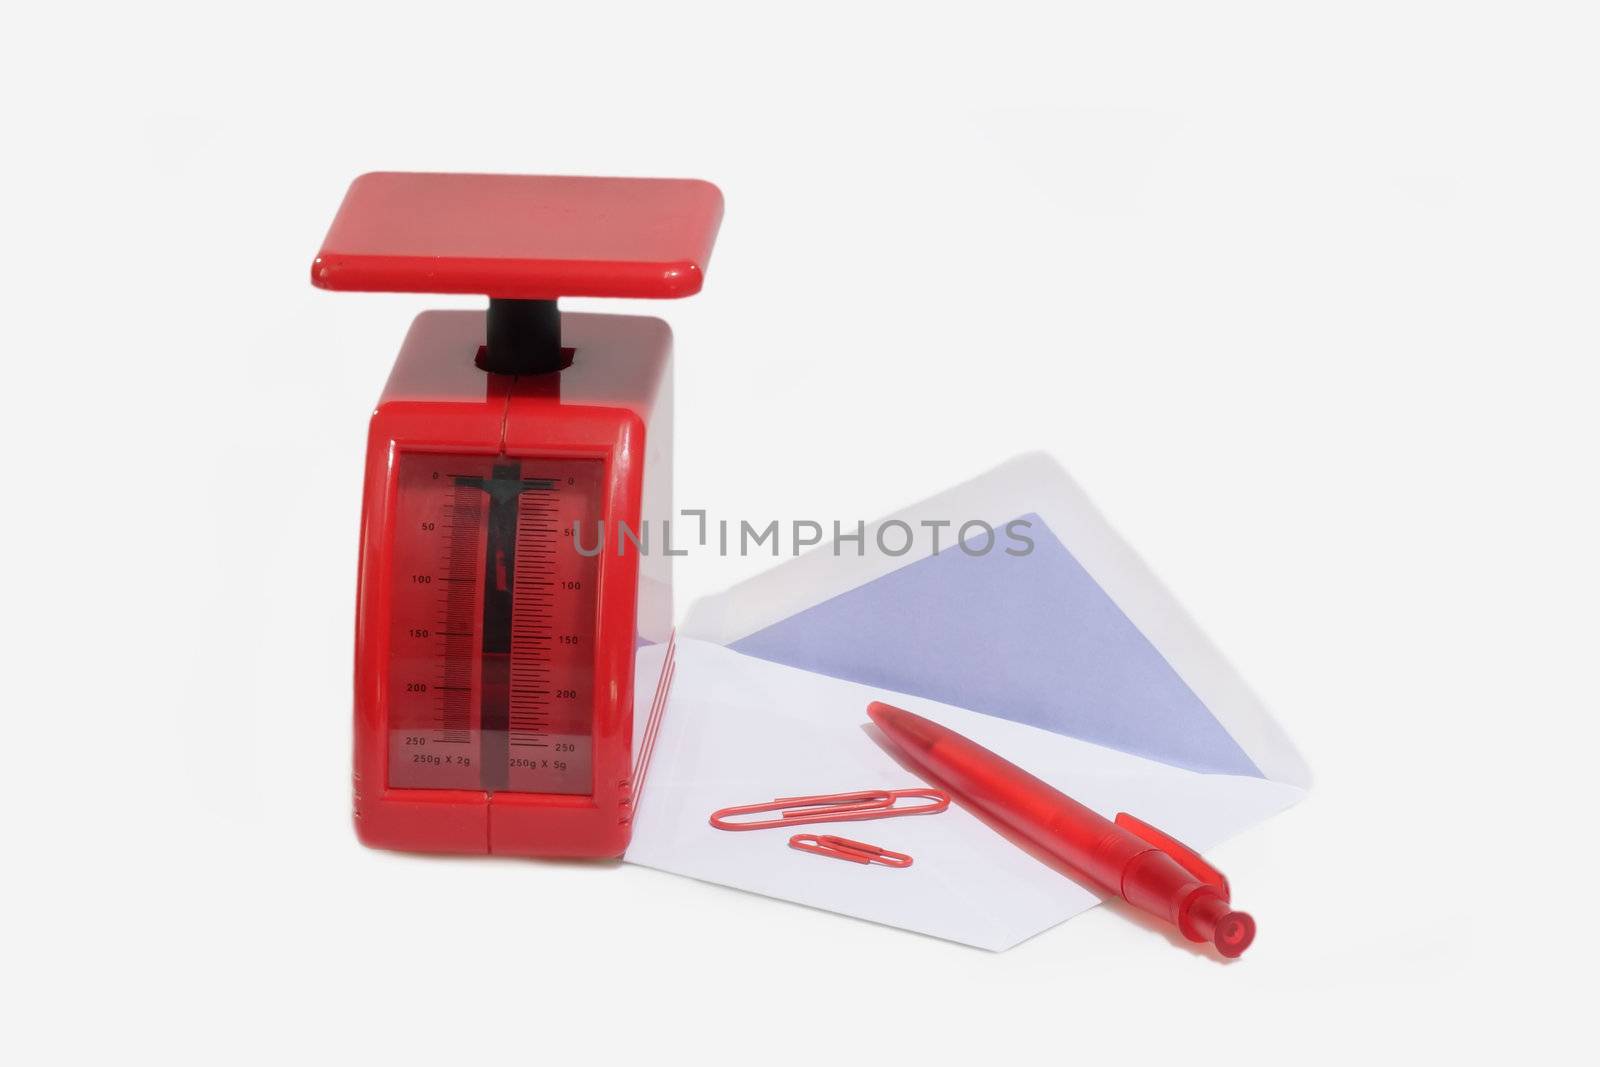 Red letter scale with envelope, ballpen and paper clips on bright background